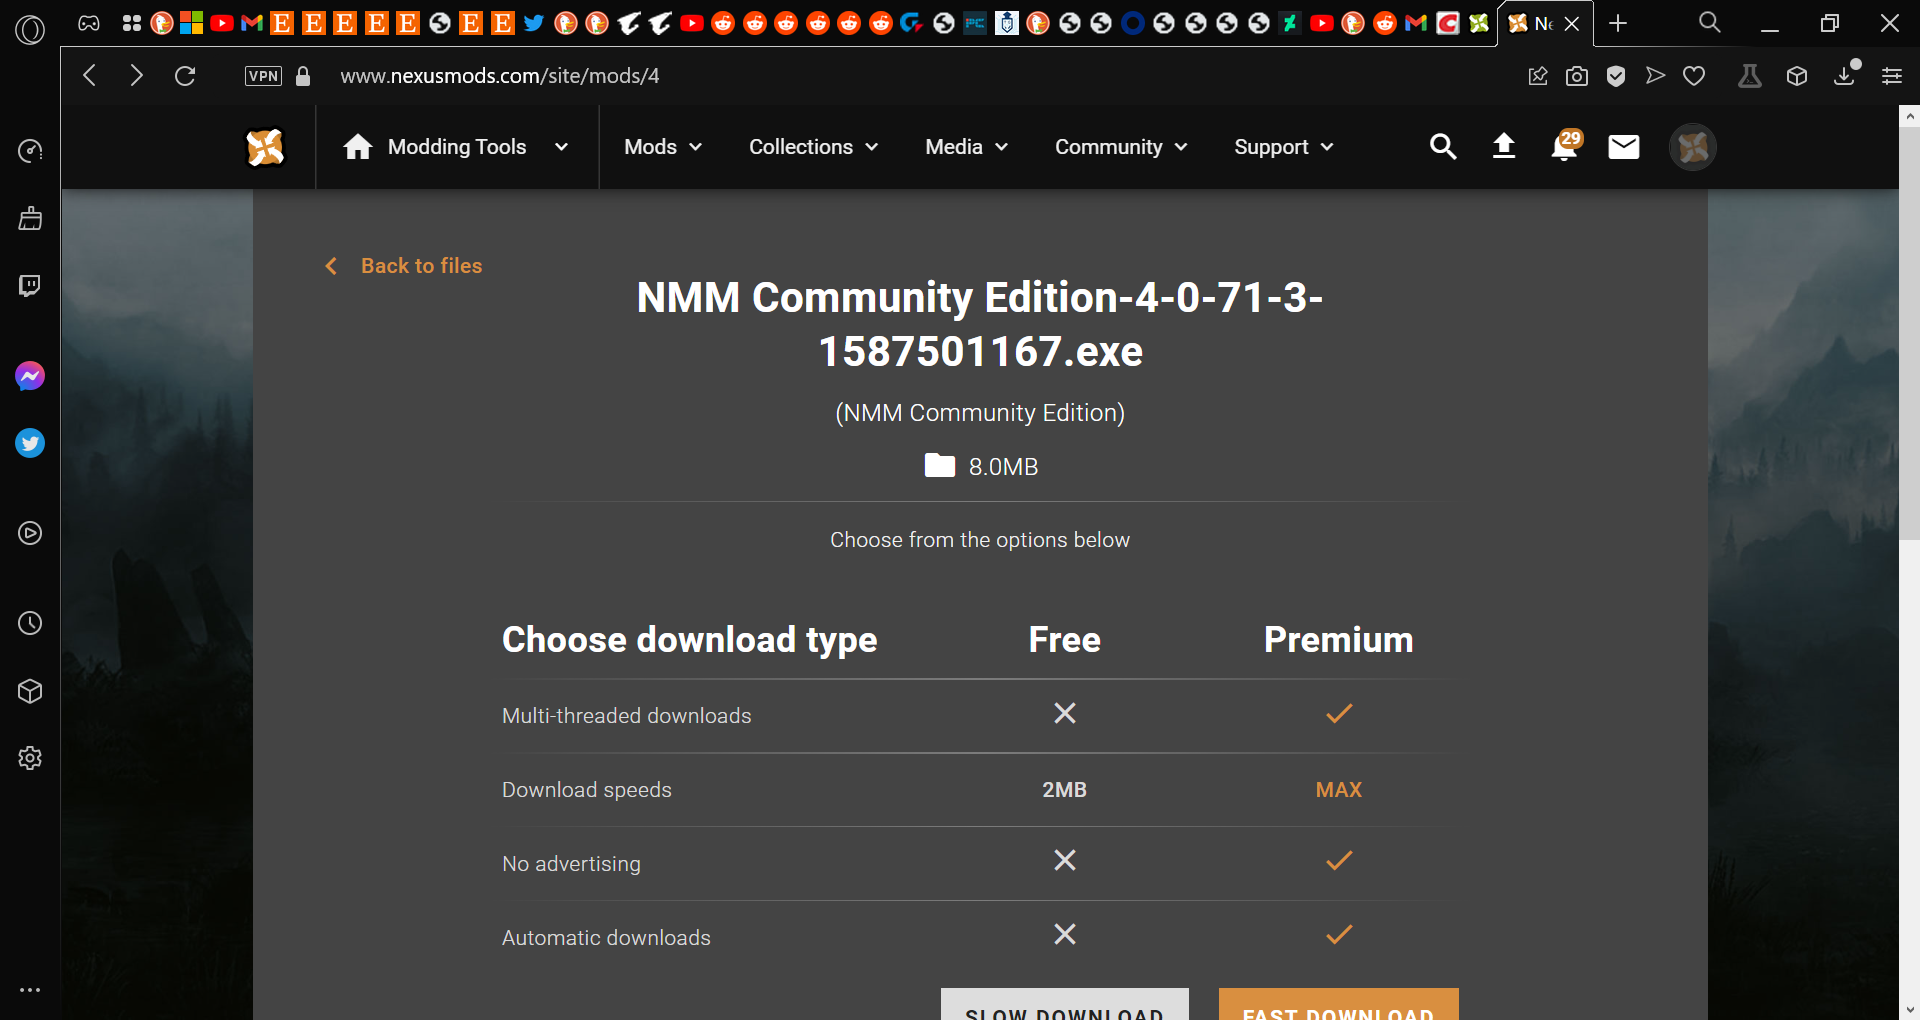 NMM Community Edition: Reviews, Features, Pricing & Download